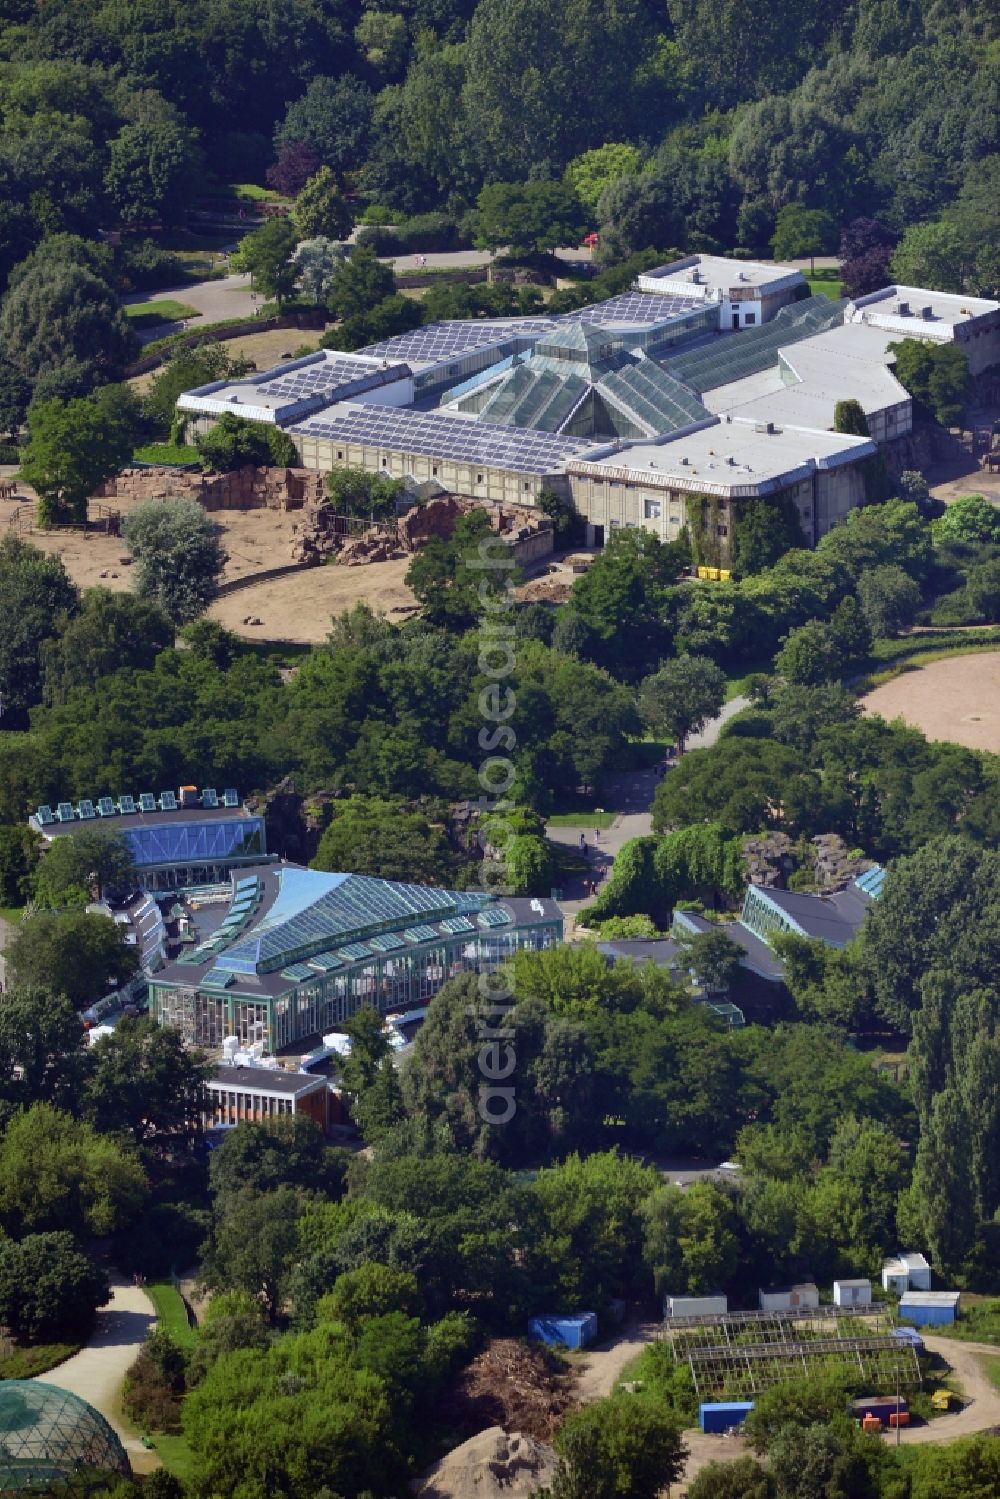 Aerial image Berlin - The zoo Tierpark Berlin in the Friedrichsfelde part of the district of Lichtenberg in Berlin in the state of Brandenburg. The park is the biggest landscape zoological garden in Europe. View of the Alfred Brehm House in the foreground which includes a café and is a listed building. In the background is the big pachyderm building - the Elephant House - which is home to African and Asian elephants